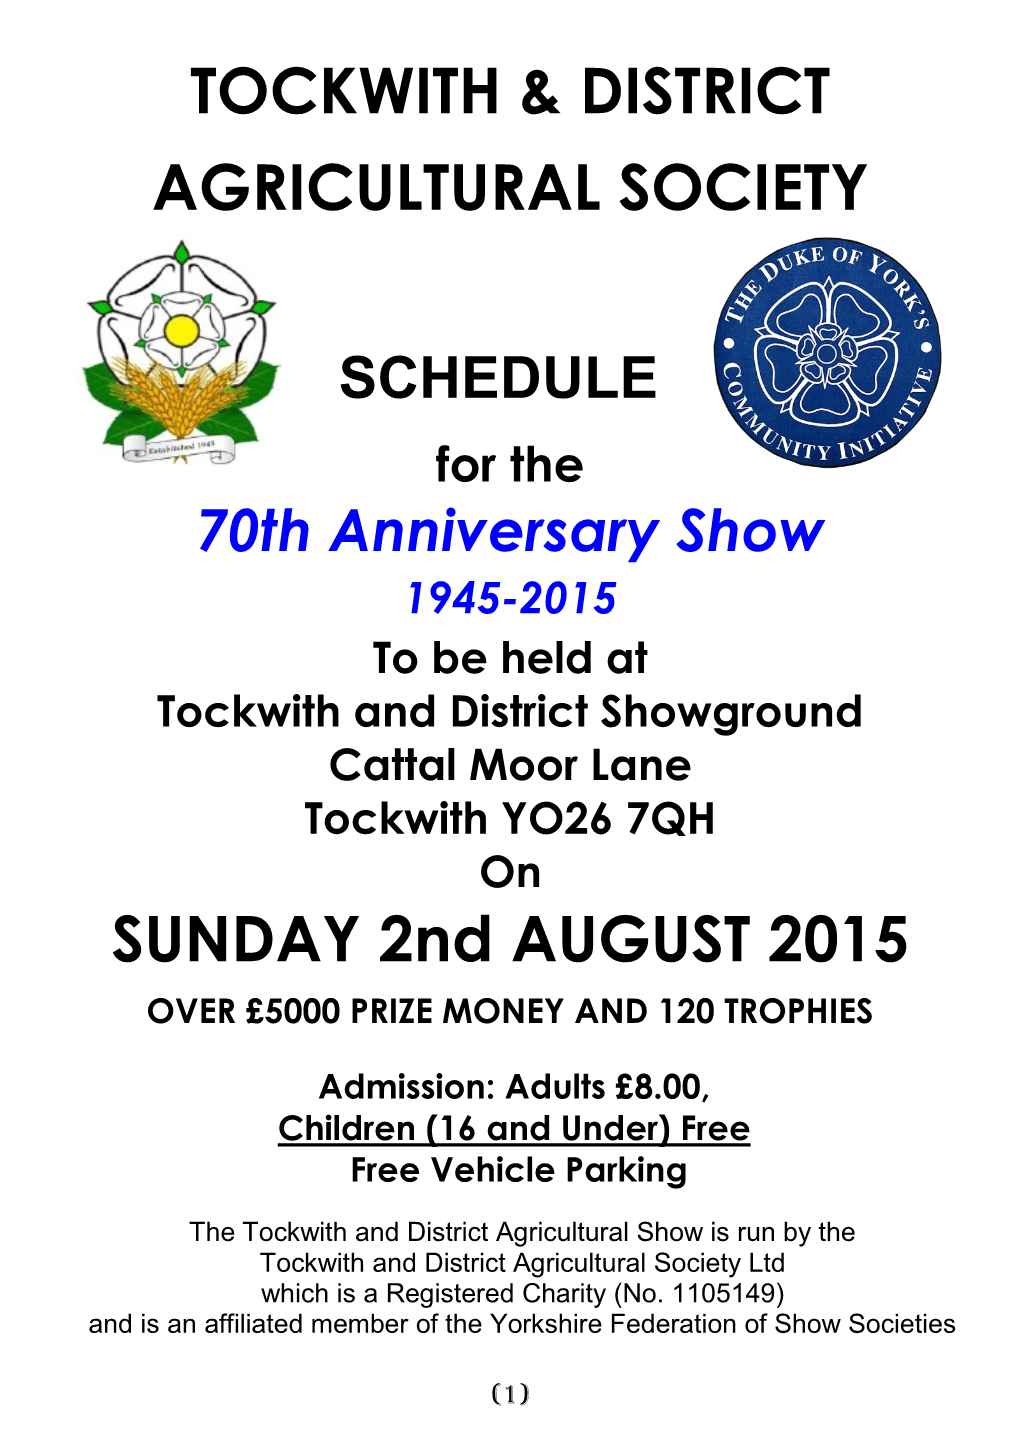 Tockwith & District Agricultural Society